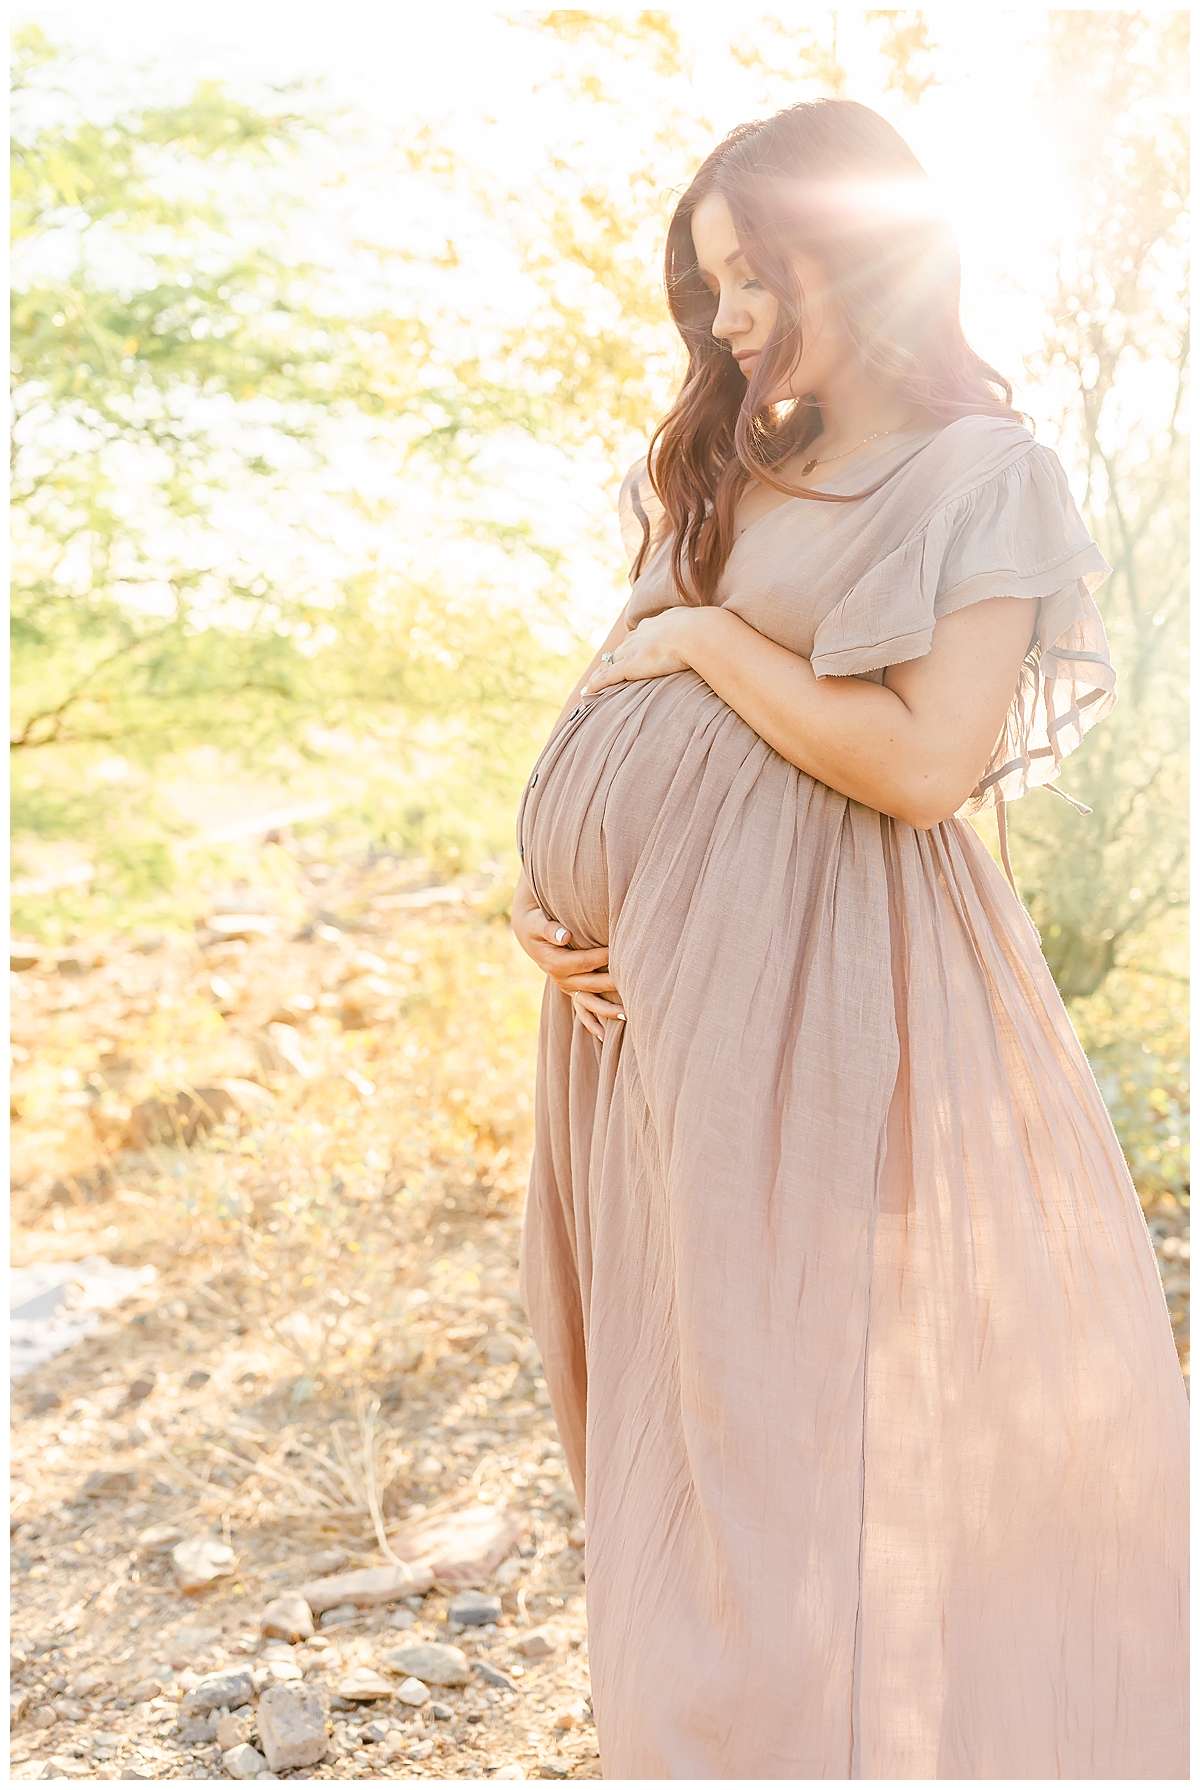 Maternity Photos with Lace Gown and Blush Dress